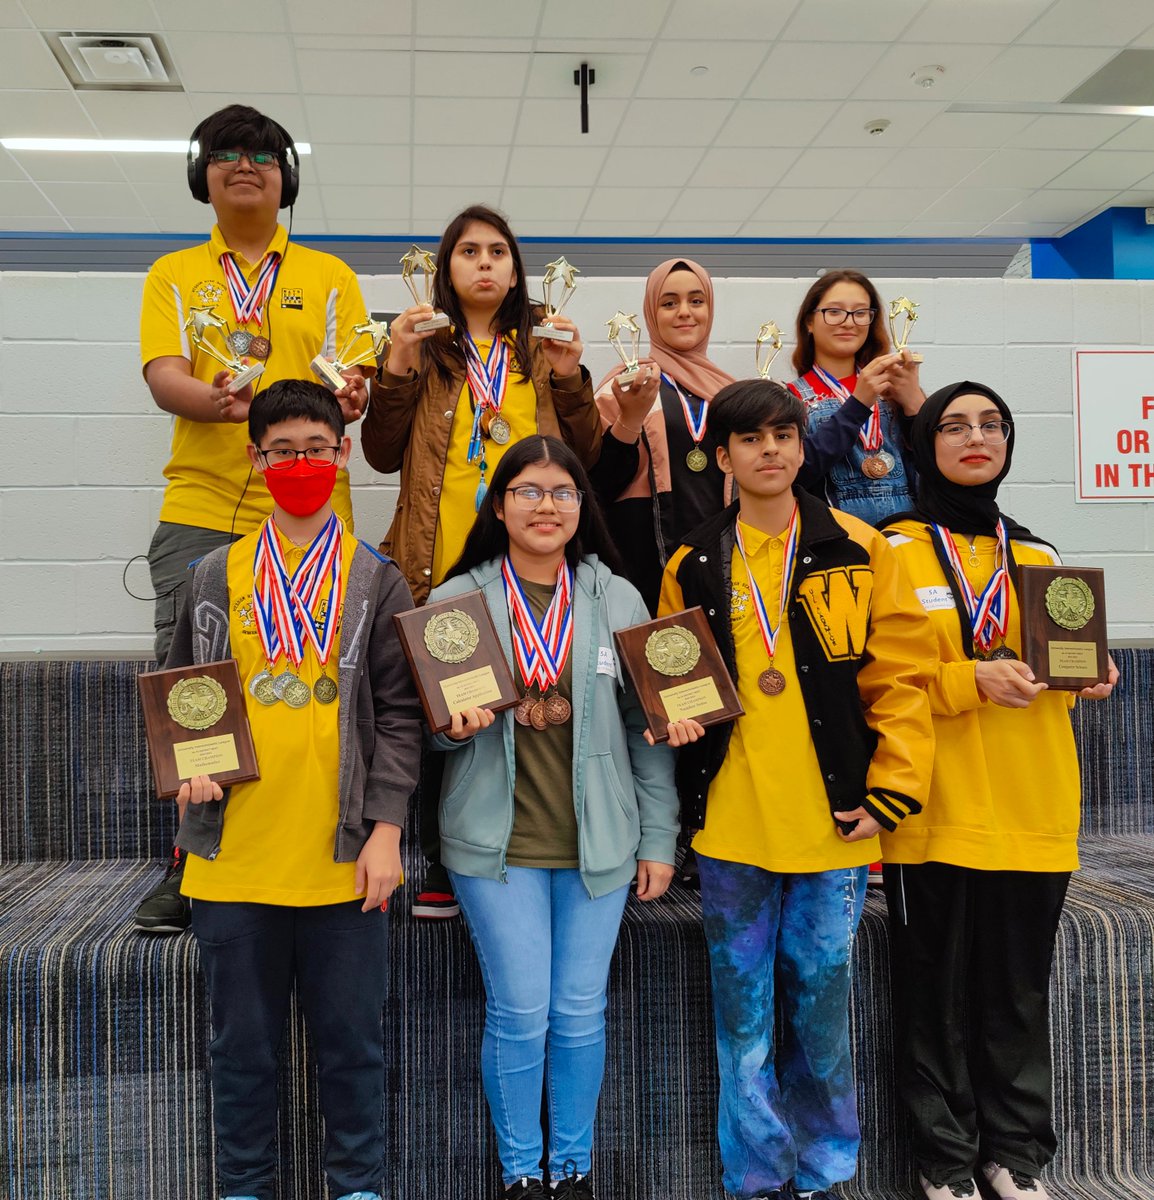 Congratulations to our @WisdomHS_HISD UIL Math teams! Our teams won 1st place team in Number Sense, Calculator Applications, Mathematics and Computer Science! The teams are excited for regionals April 21-22! @kbrantl19 @WisdomHSMedia